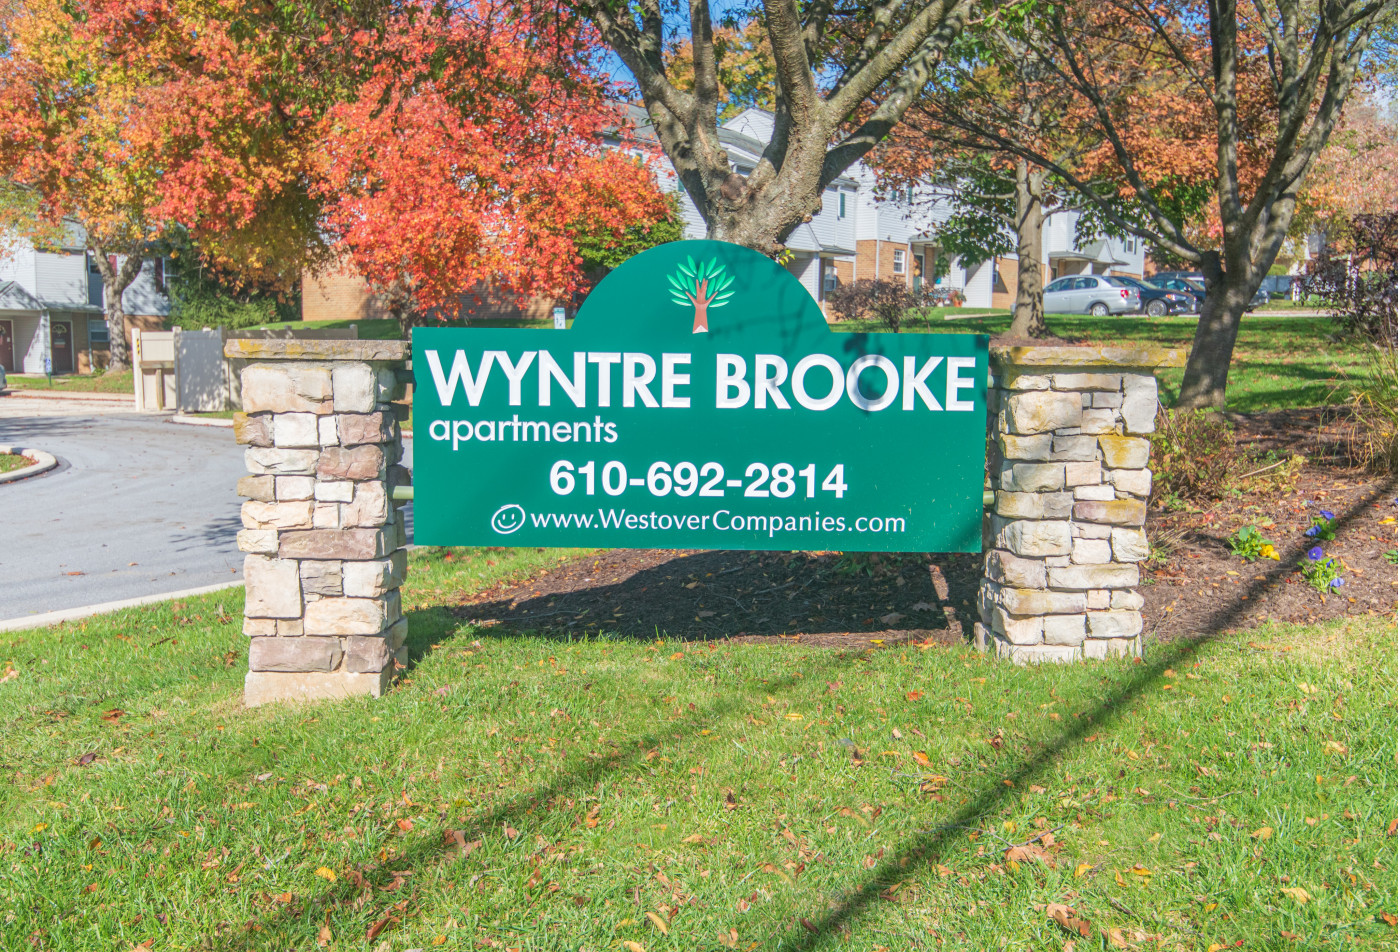 Apartments in West Chester, PA | Wyntre Brooke Apartments